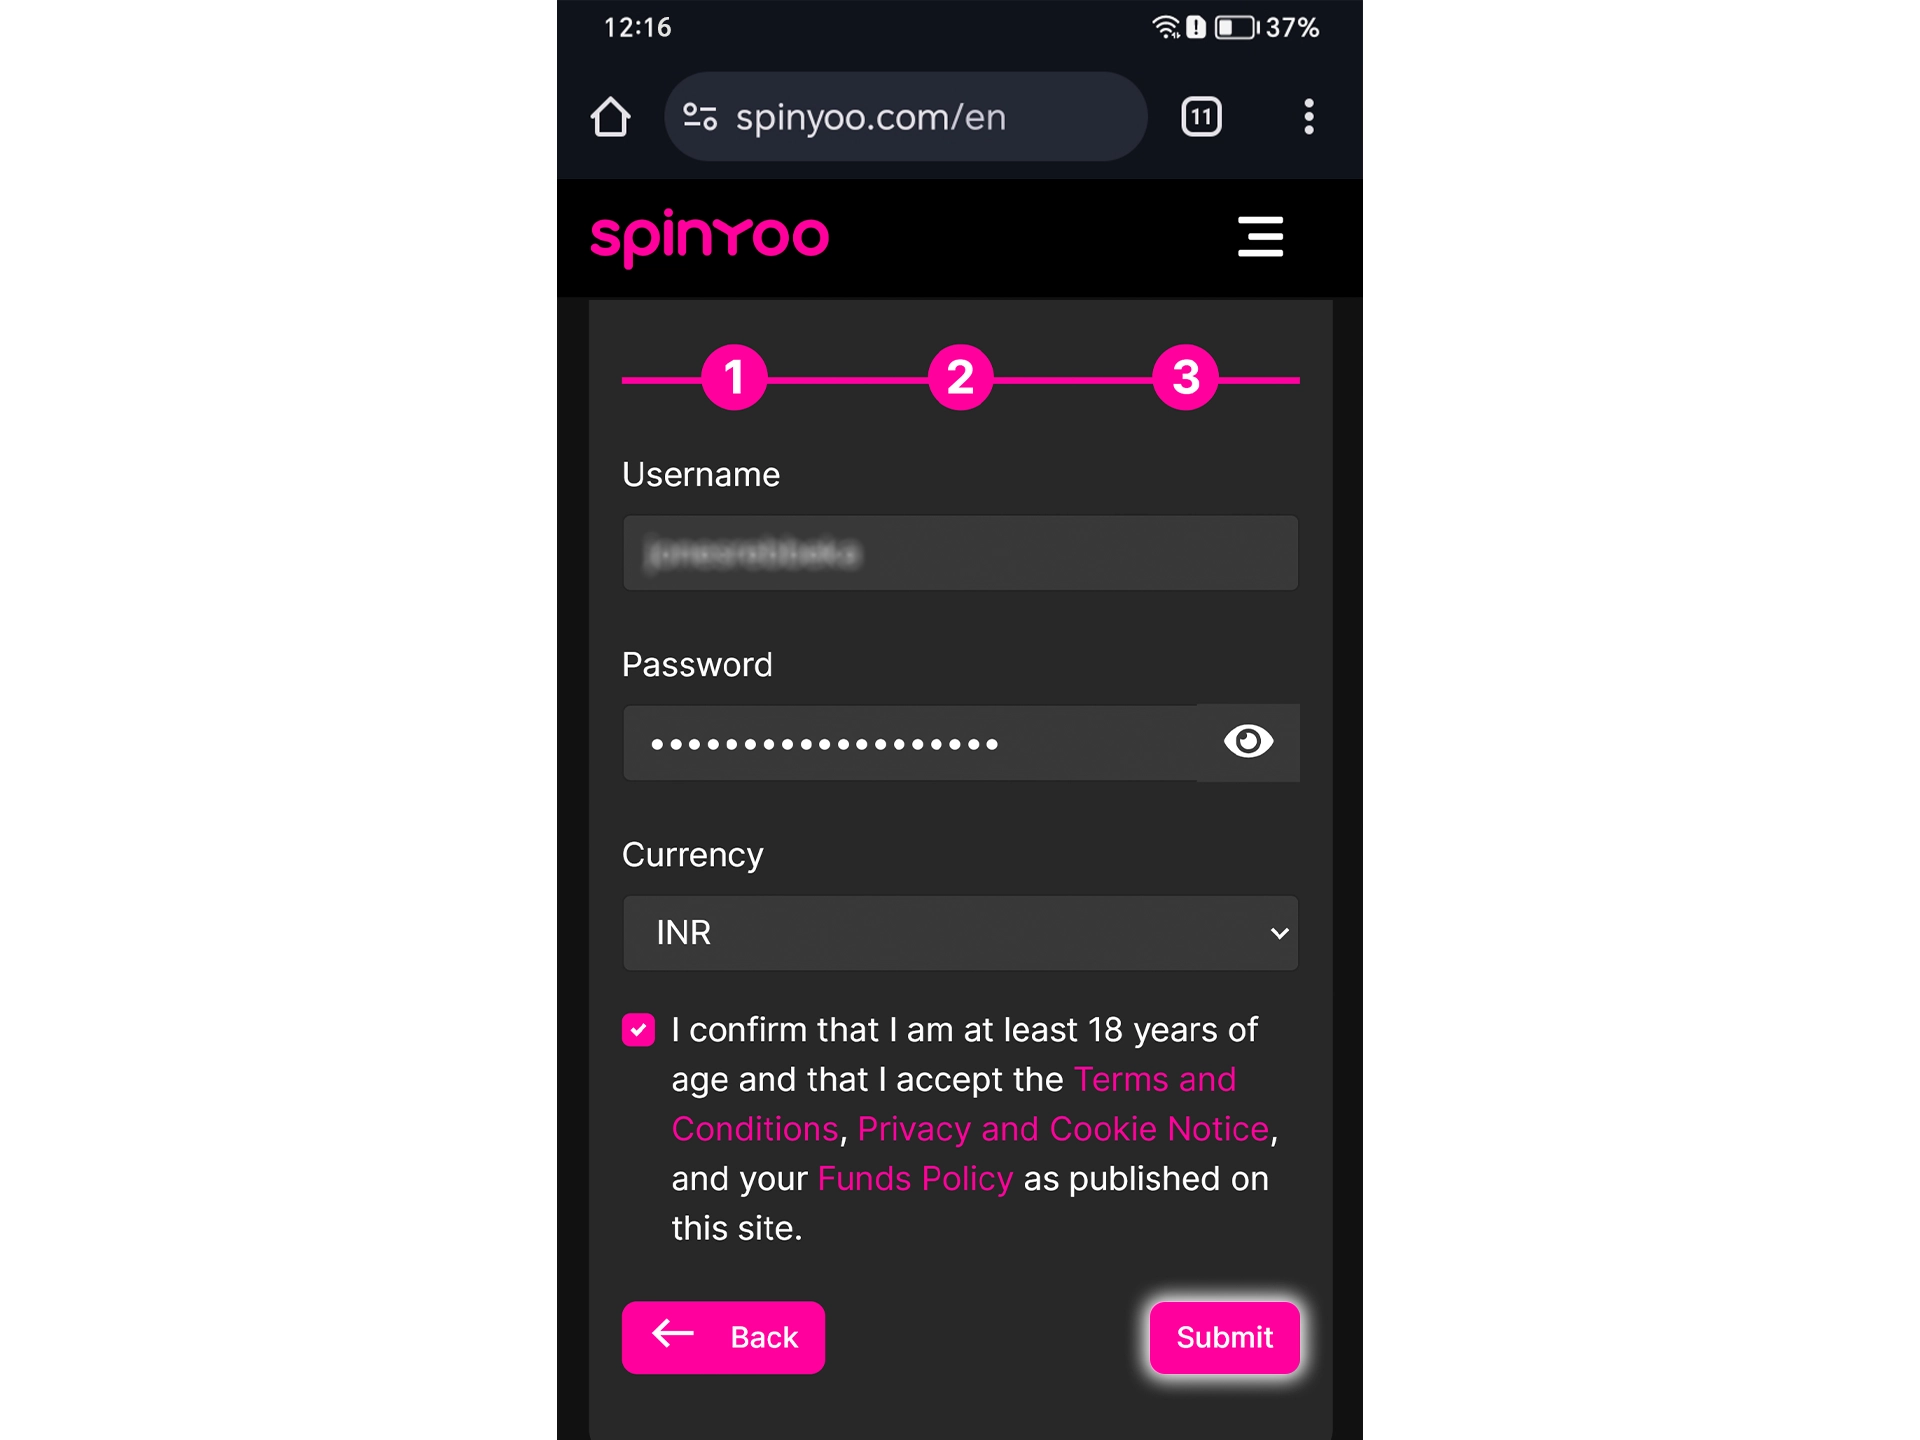 Enter your details and confirm the creation of your Spinyoo account.